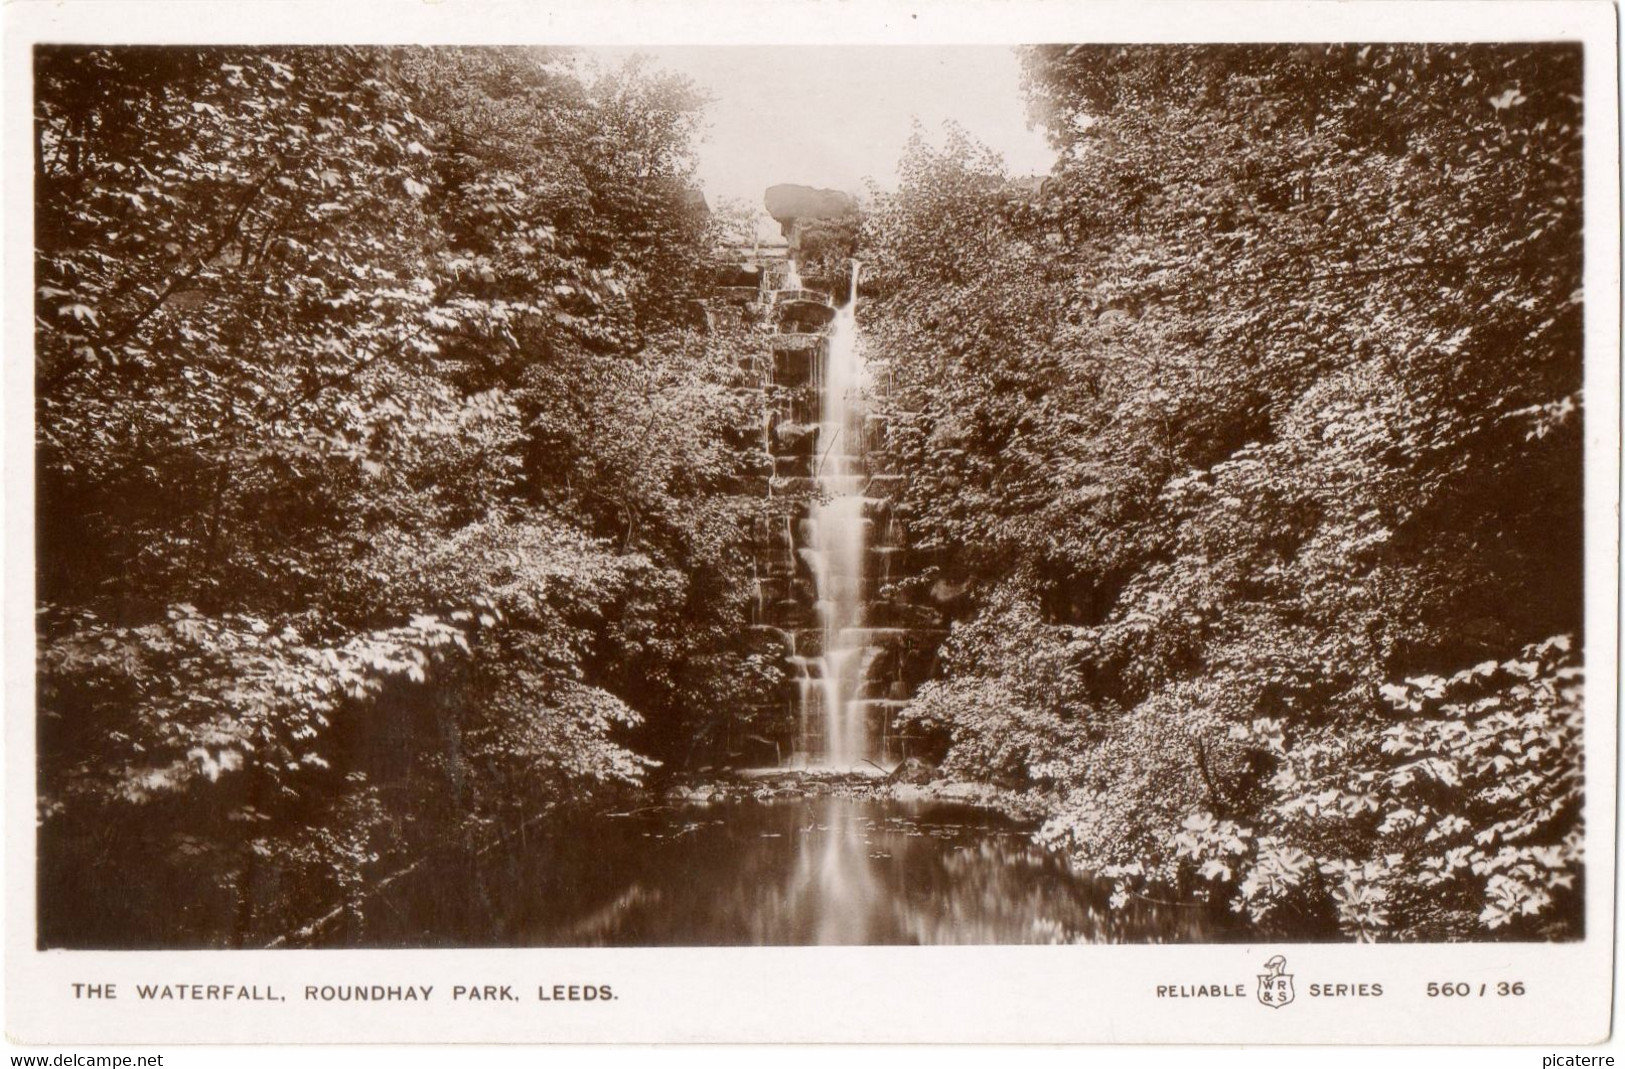 The Waterfall, Roundhay Park, Leeds, Real Photograph (WR & S Reliable Series 560/36) - Leeds